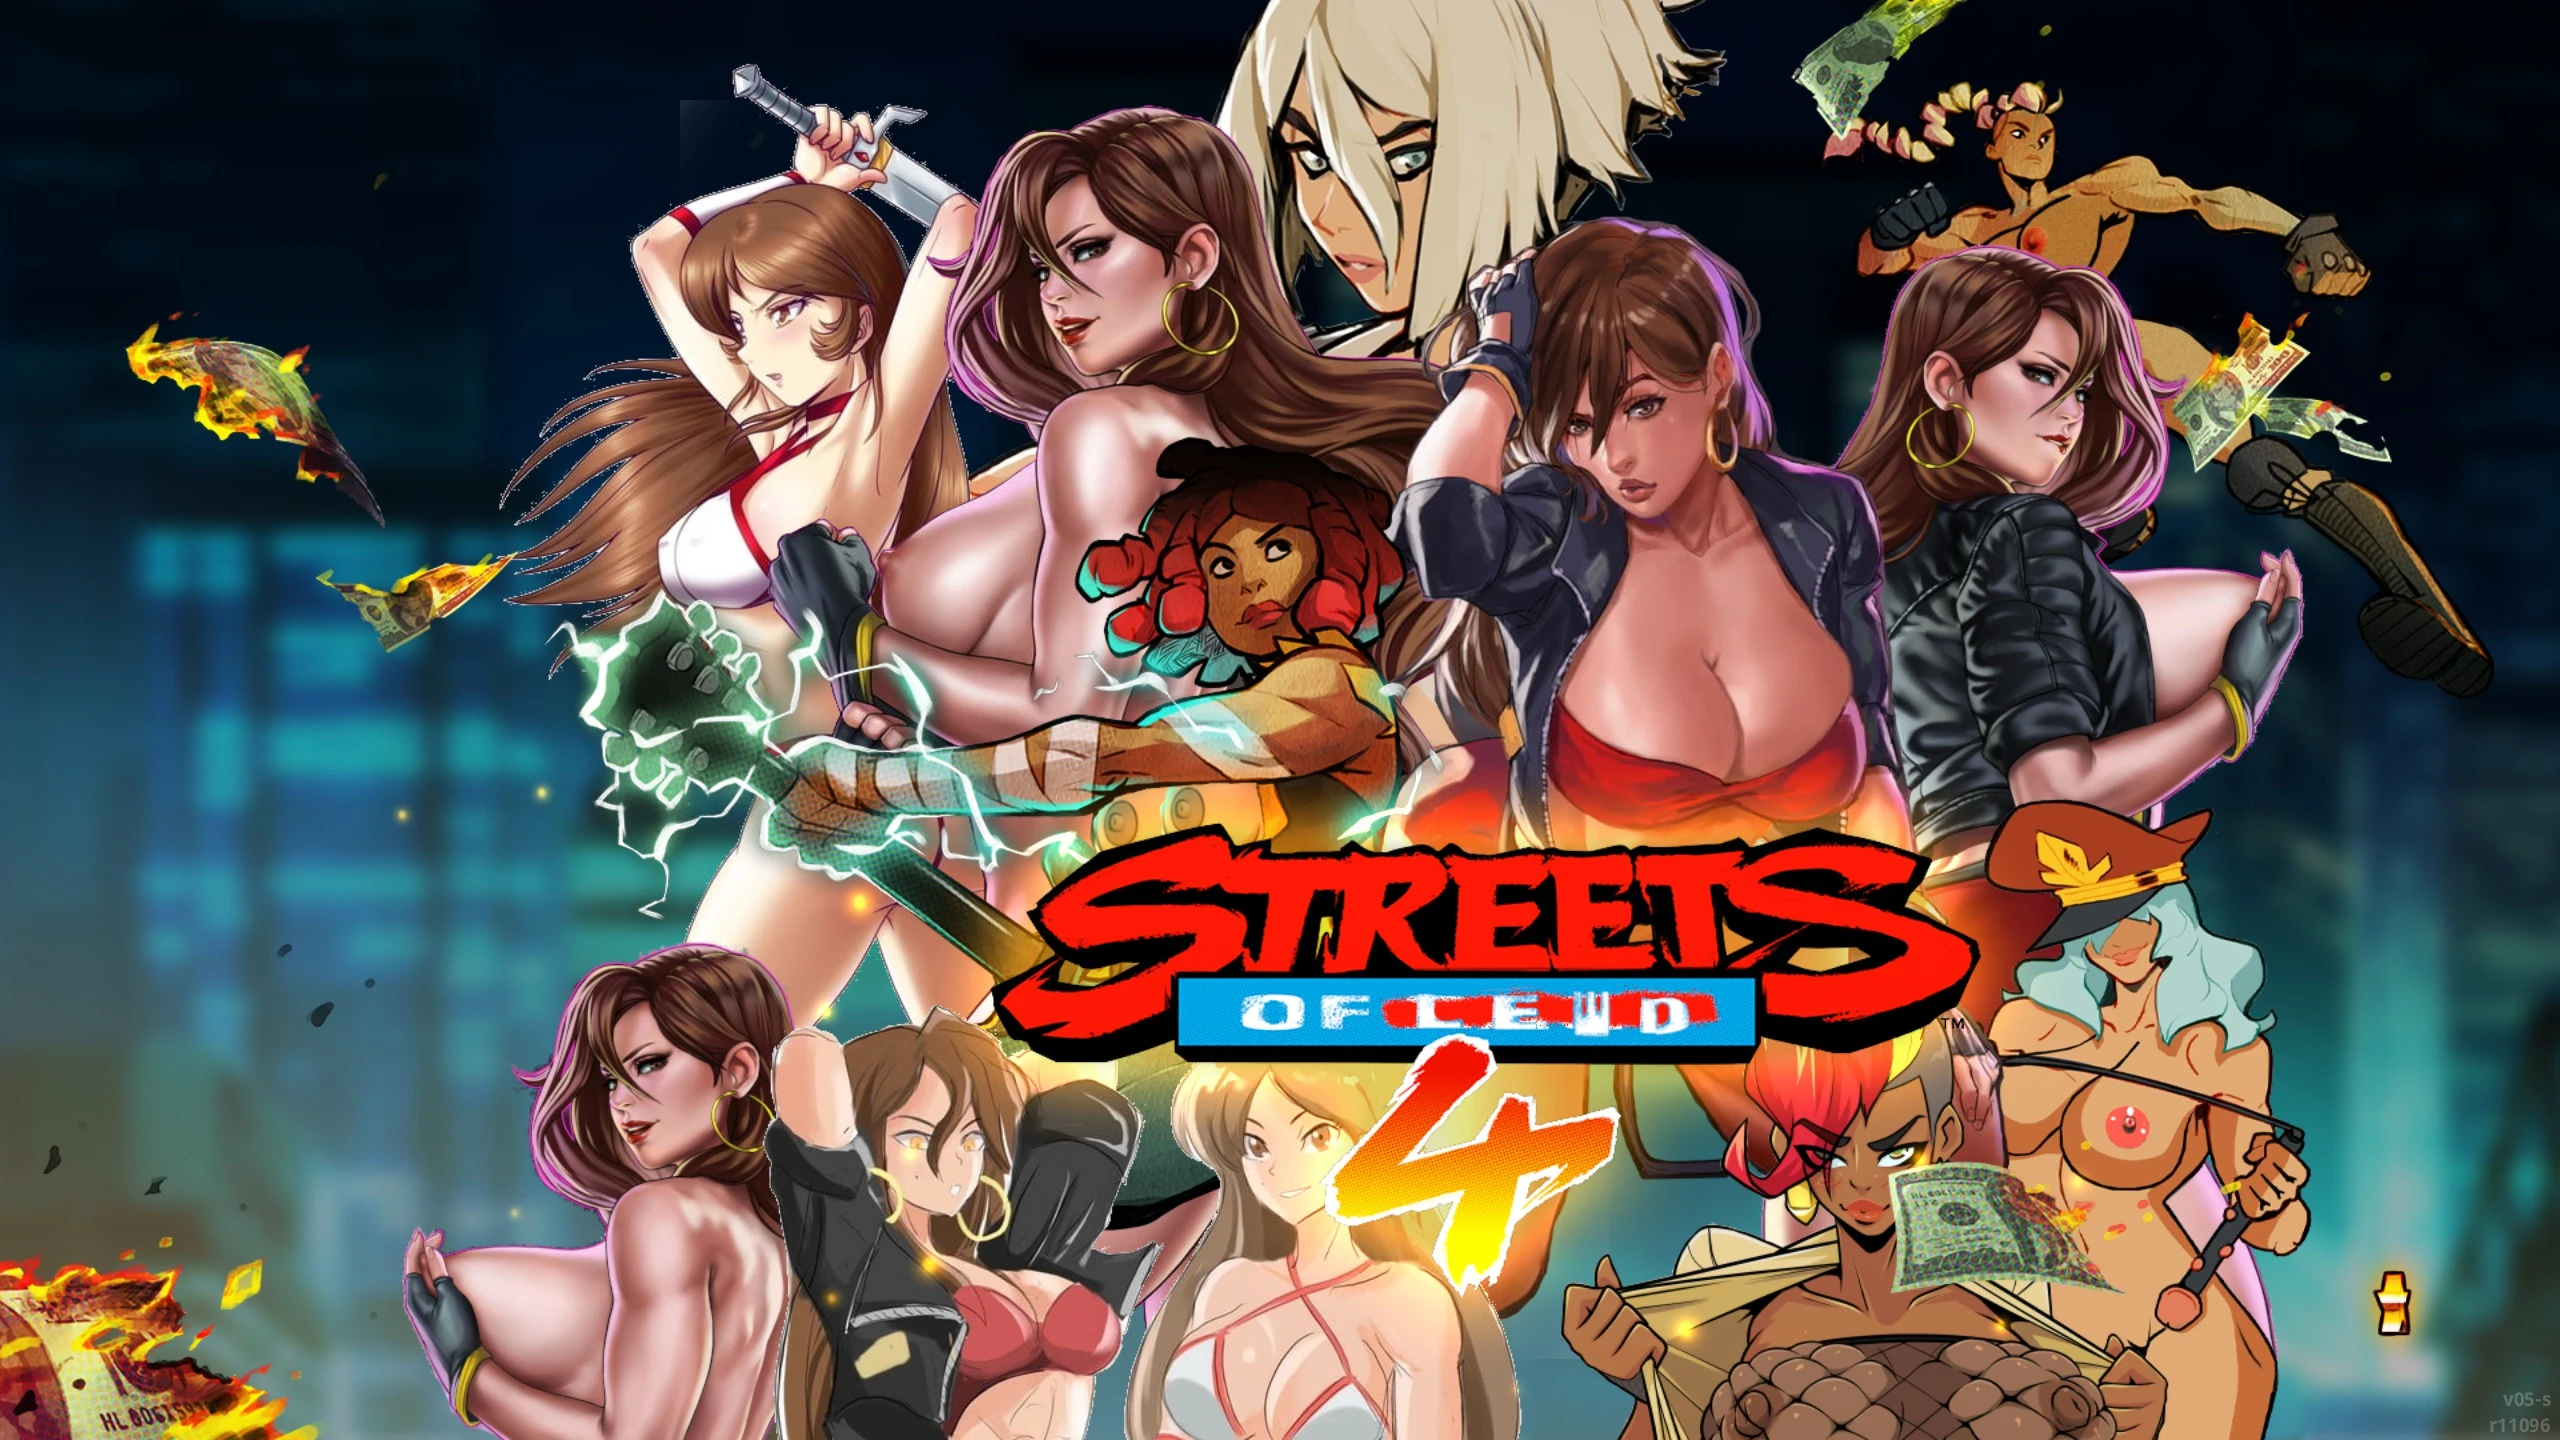 More information about "Streets of Lewd Project"